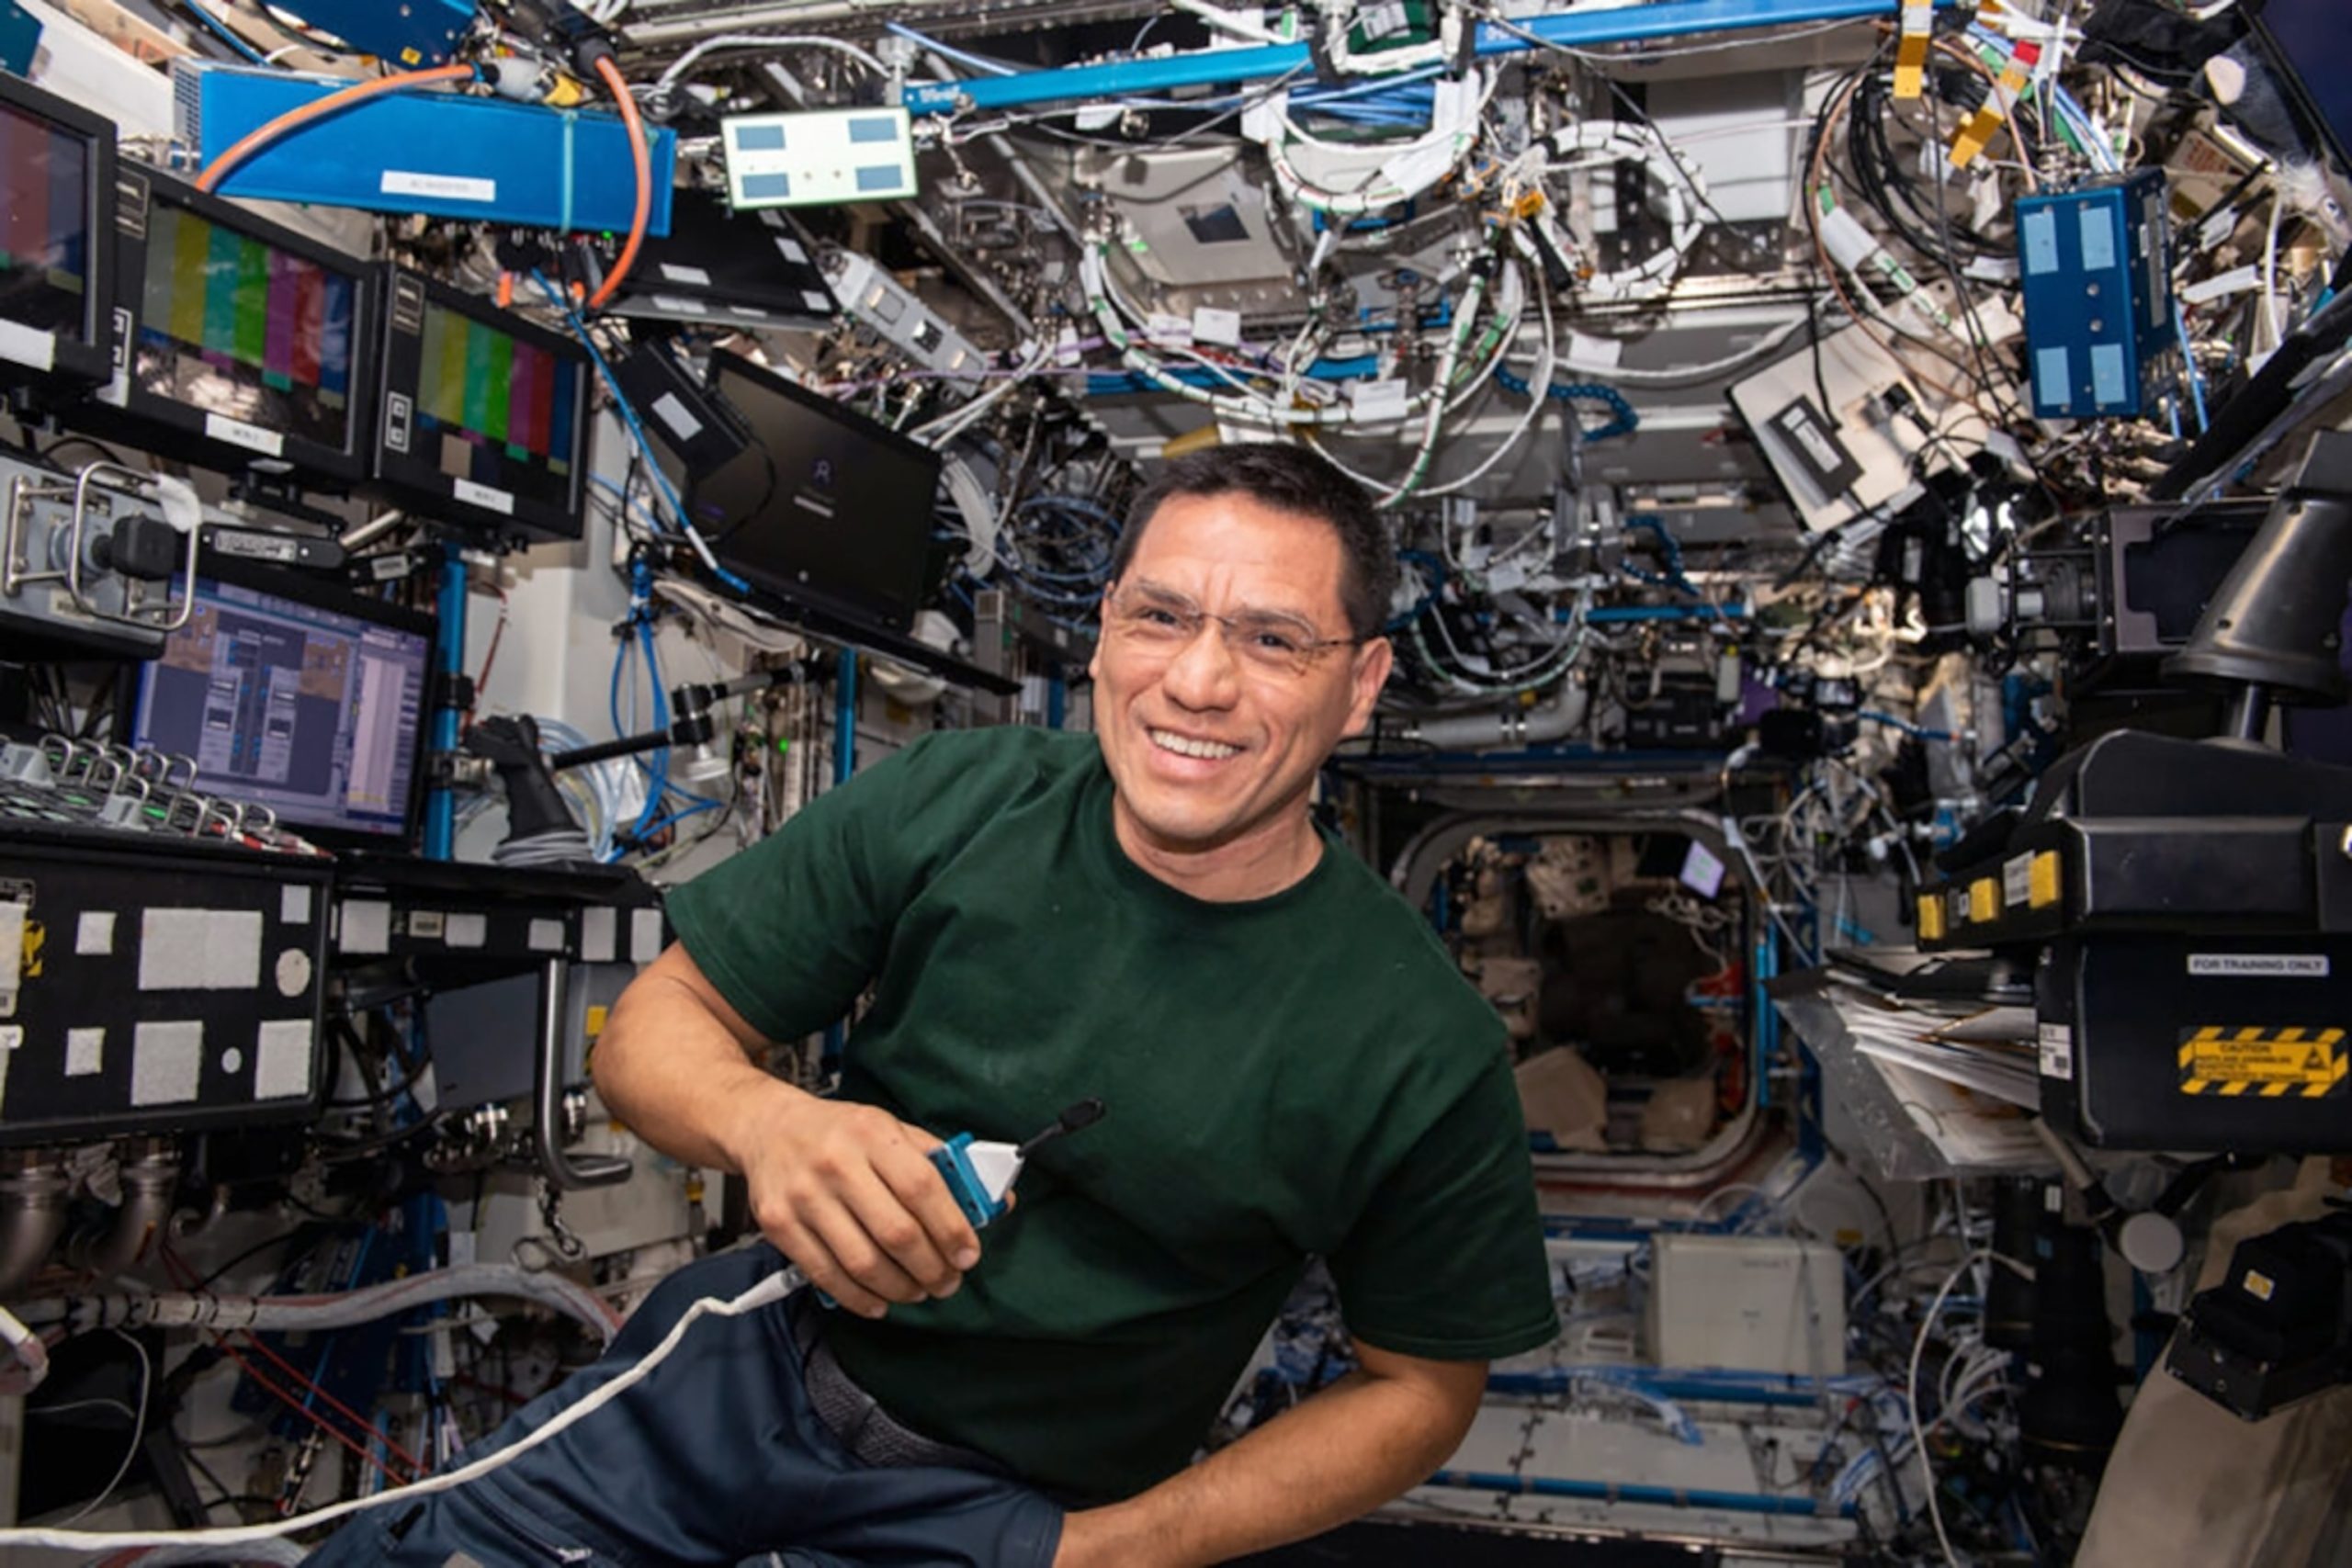 The Effects of 1 Year in Space on the Human Body: Insights from NASA Astronaut Frank Rubio's Return Home